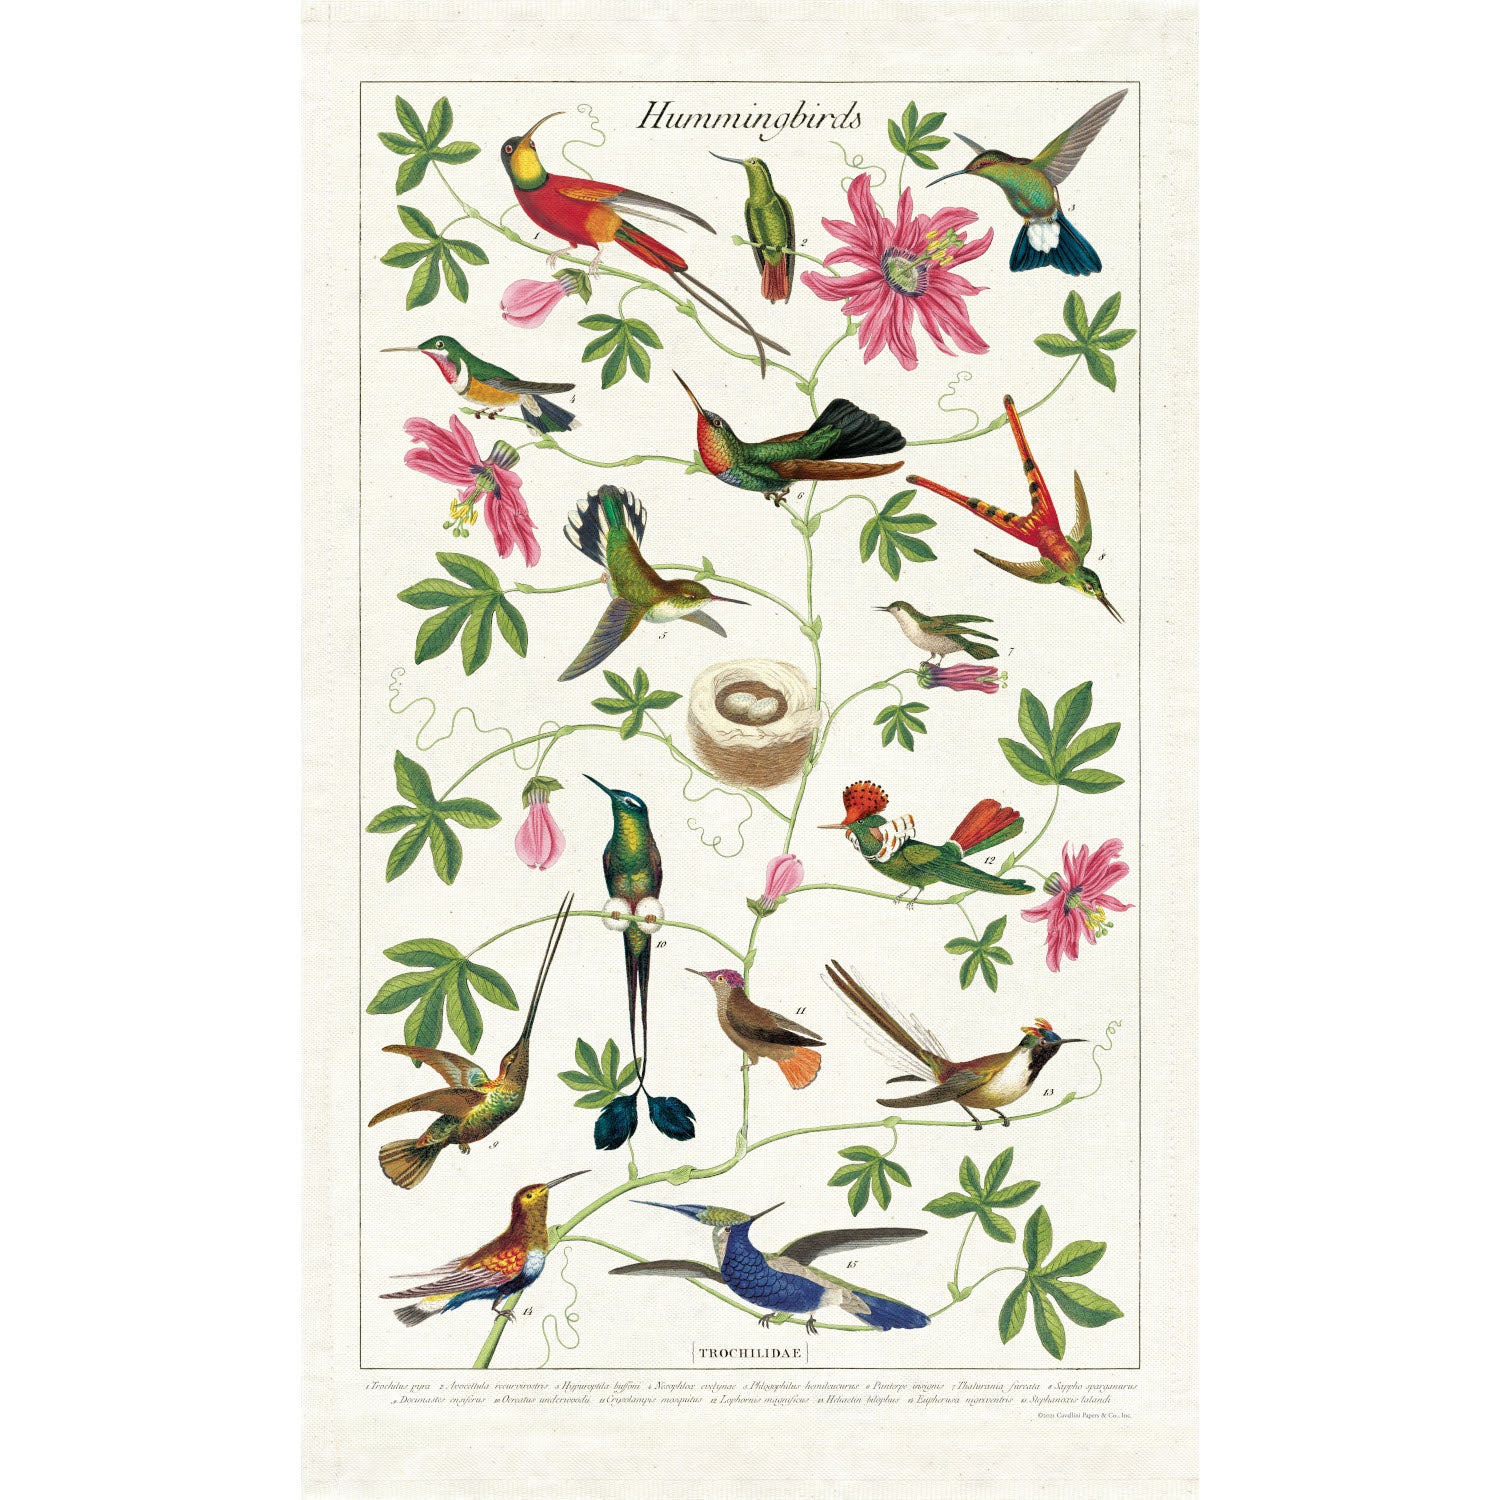 A colorful Hummingbirds Tea Towel drawing on a natural cotton English tea towel by Cavallini Papers &amp; Co.